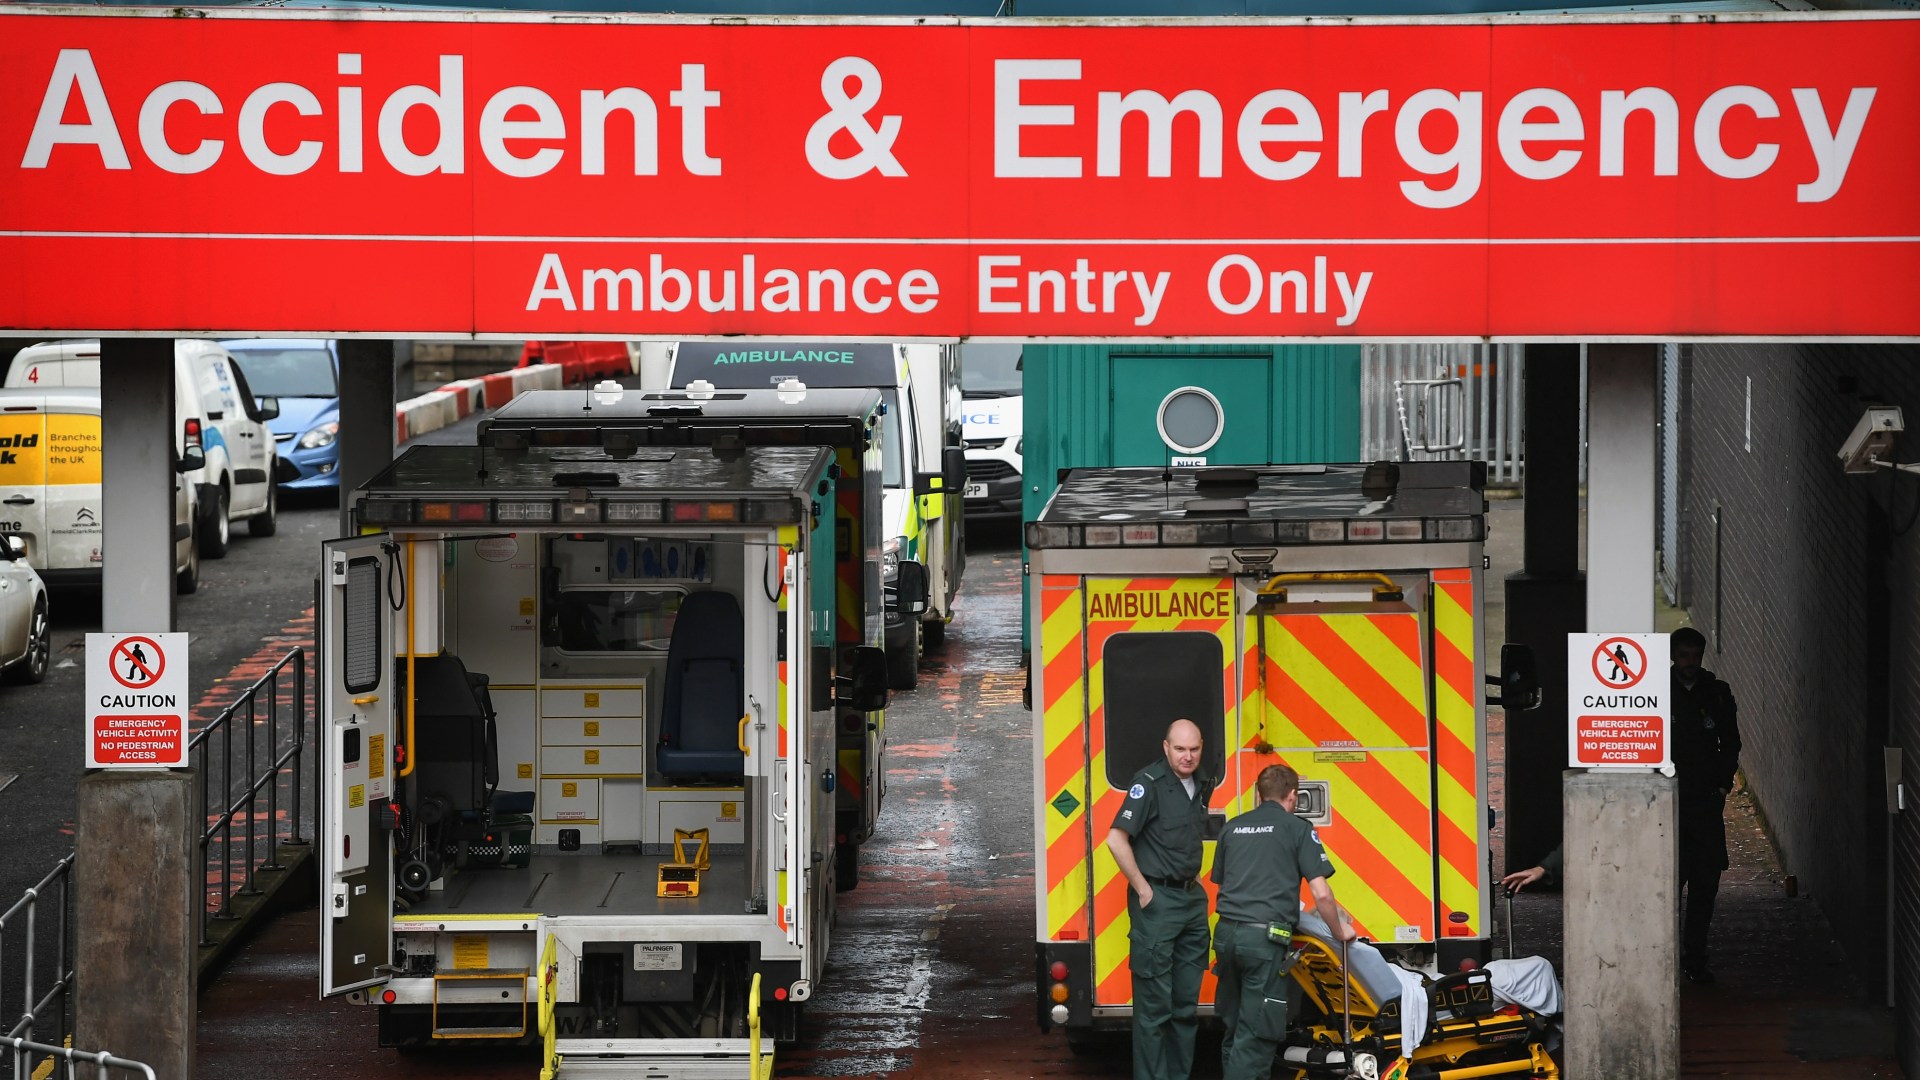 Patients are waiting 24 HOURS in A&E to be admitted to hospital, analysis shows [Video]